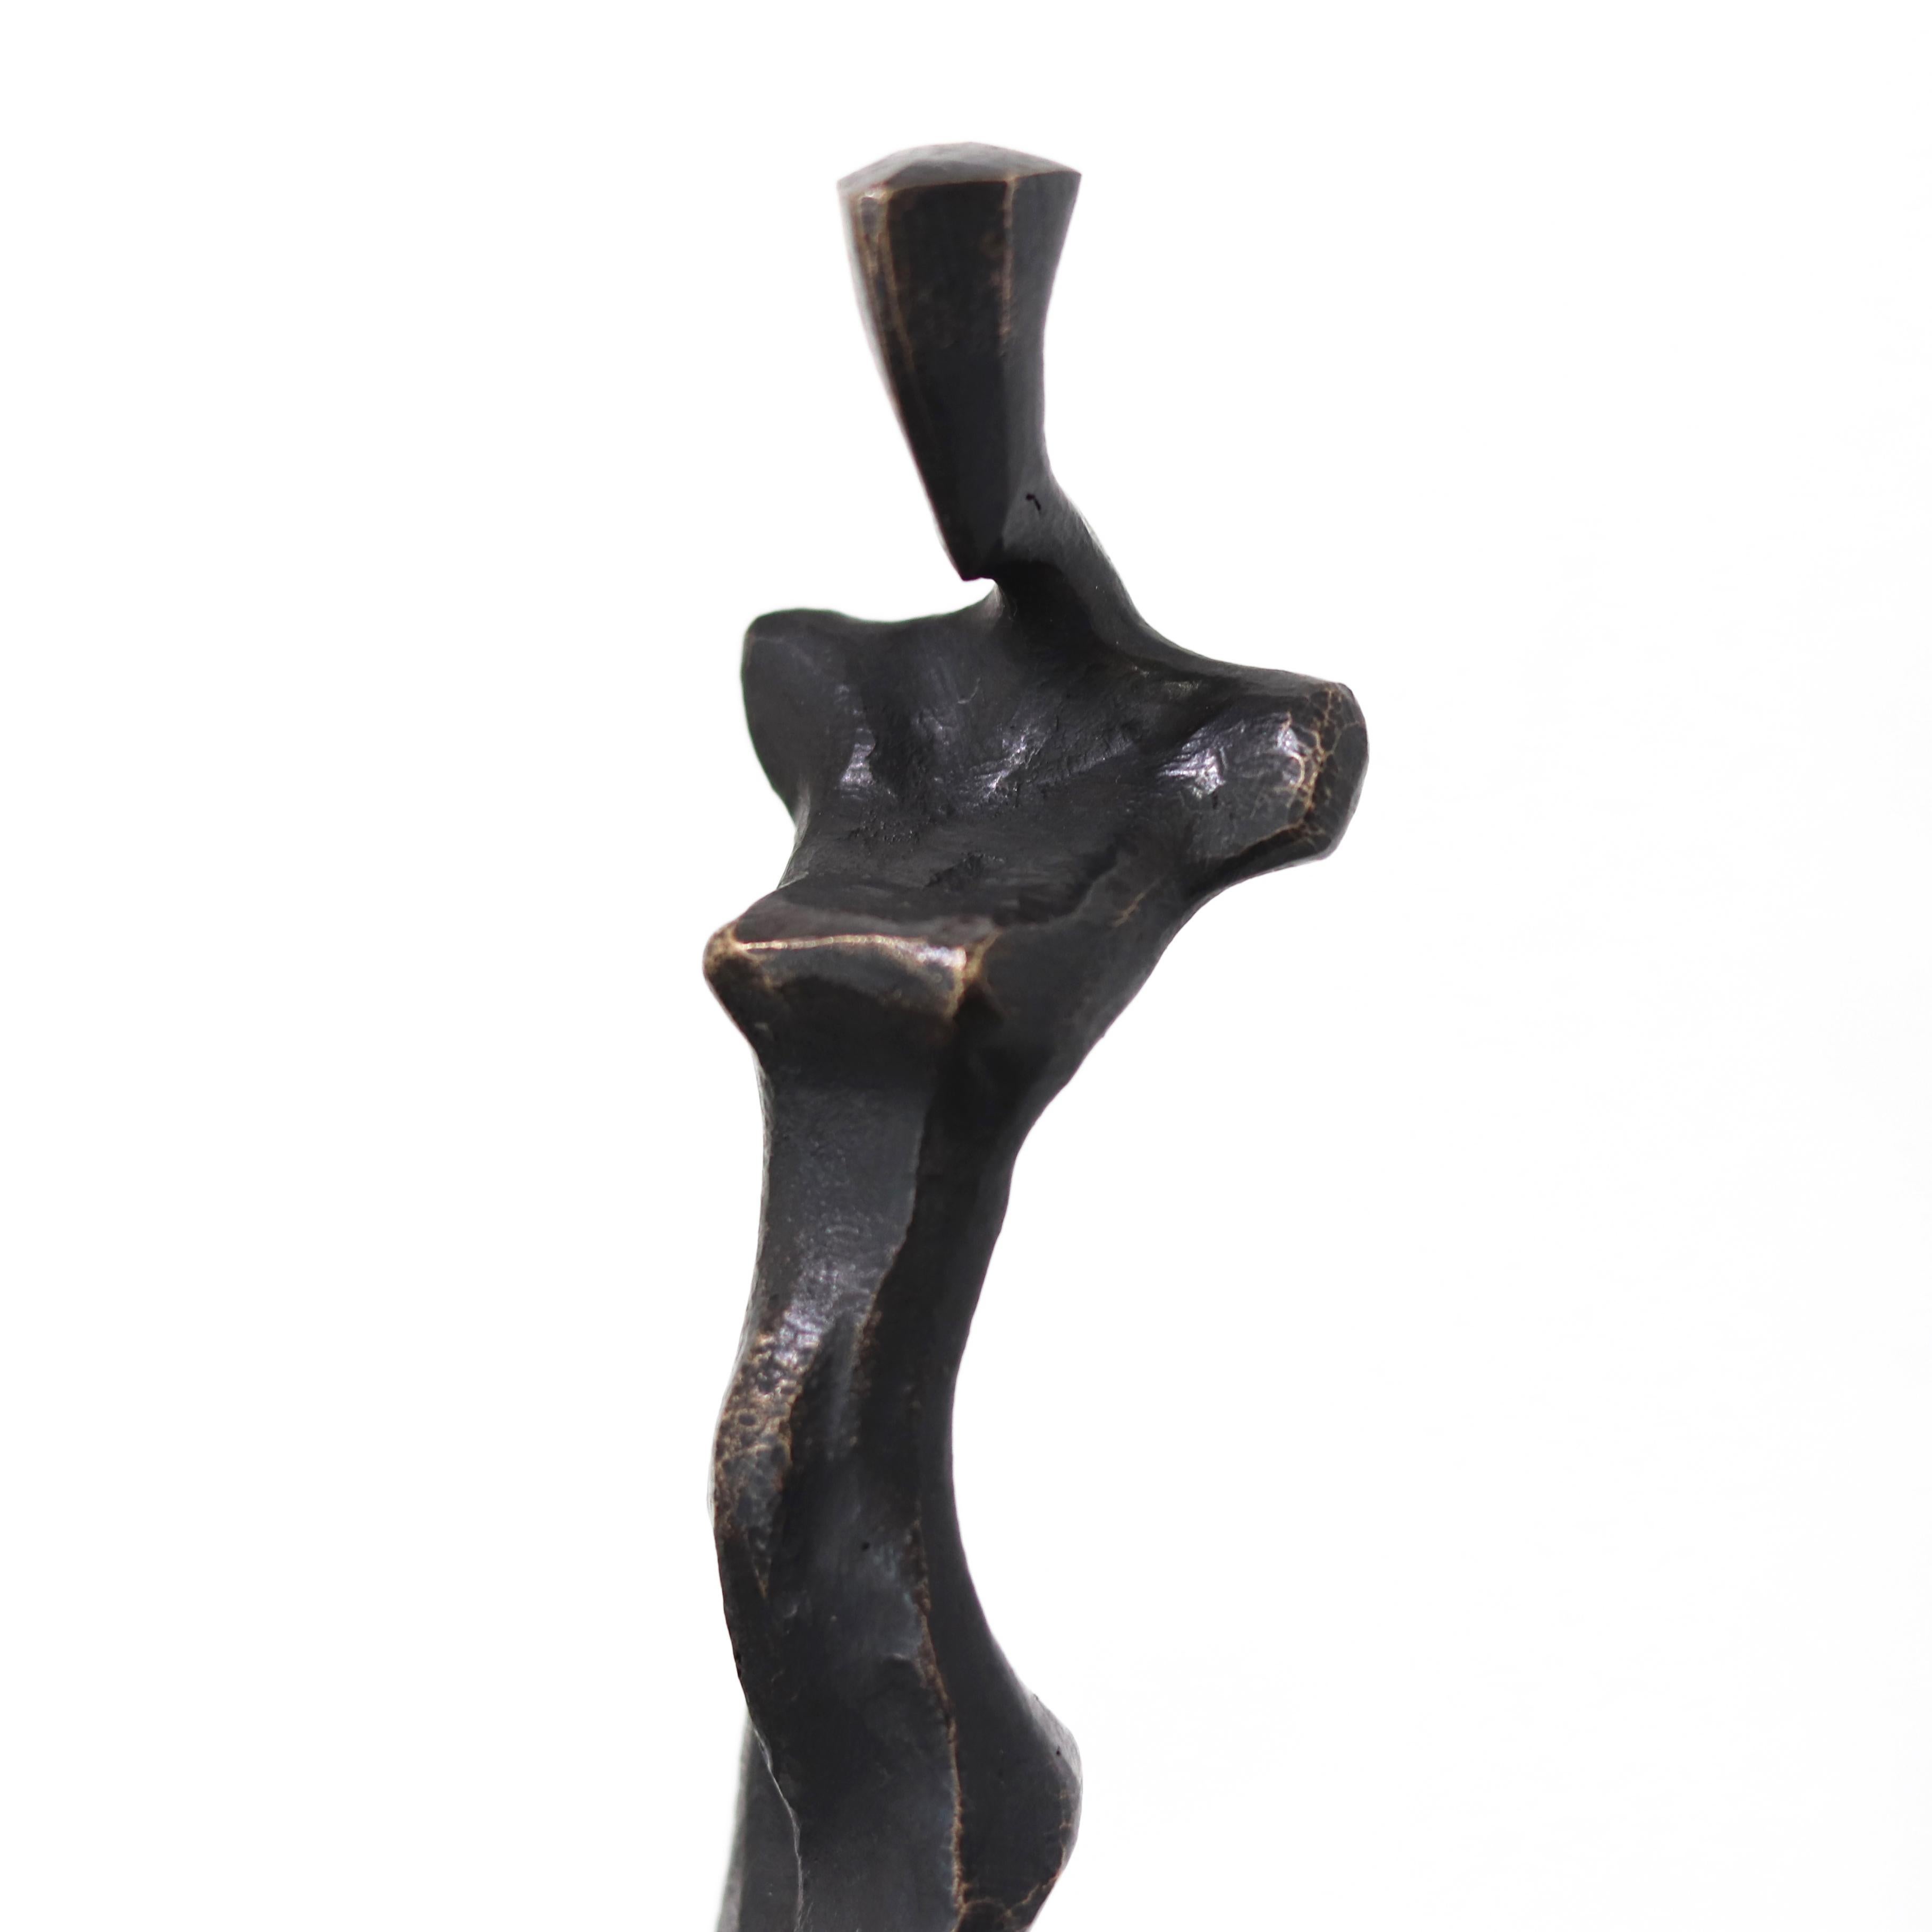 German sculptor Nando Kallweit produces figurative bronze sculptures and reliefs with aquiline and a graceful modern appeal. Kallweit is inspired by seemingly disparate cultures; the strength of ancient Egyptian sculptures, the dynamic forms of the